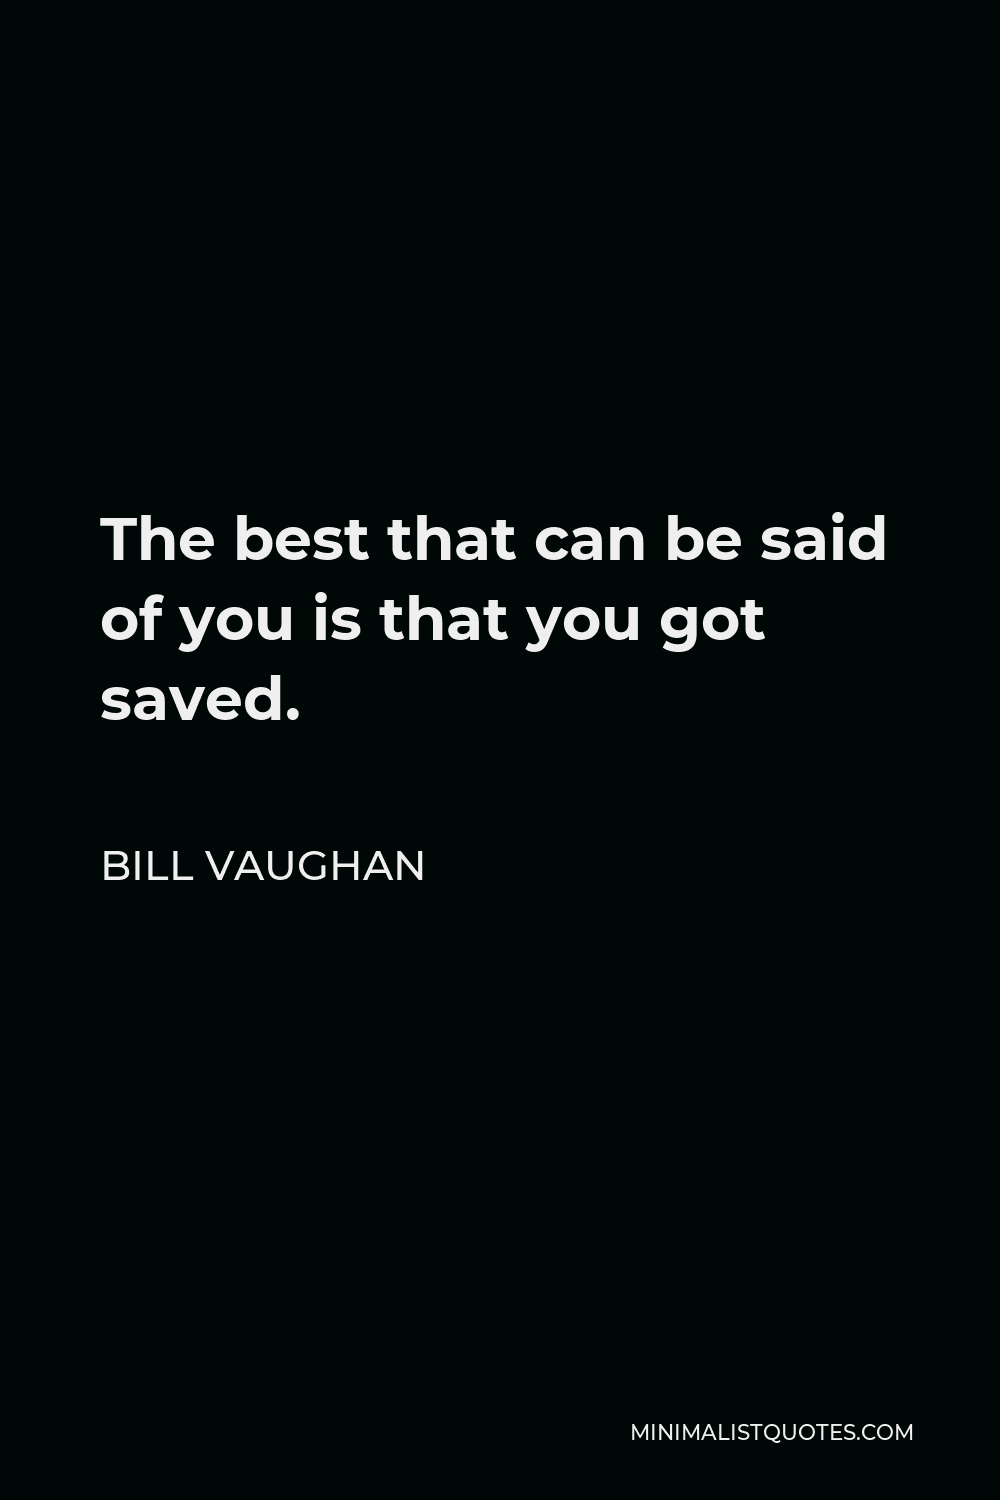 Bill Vaughan Quote - The best that can be said of you is that you got saved.